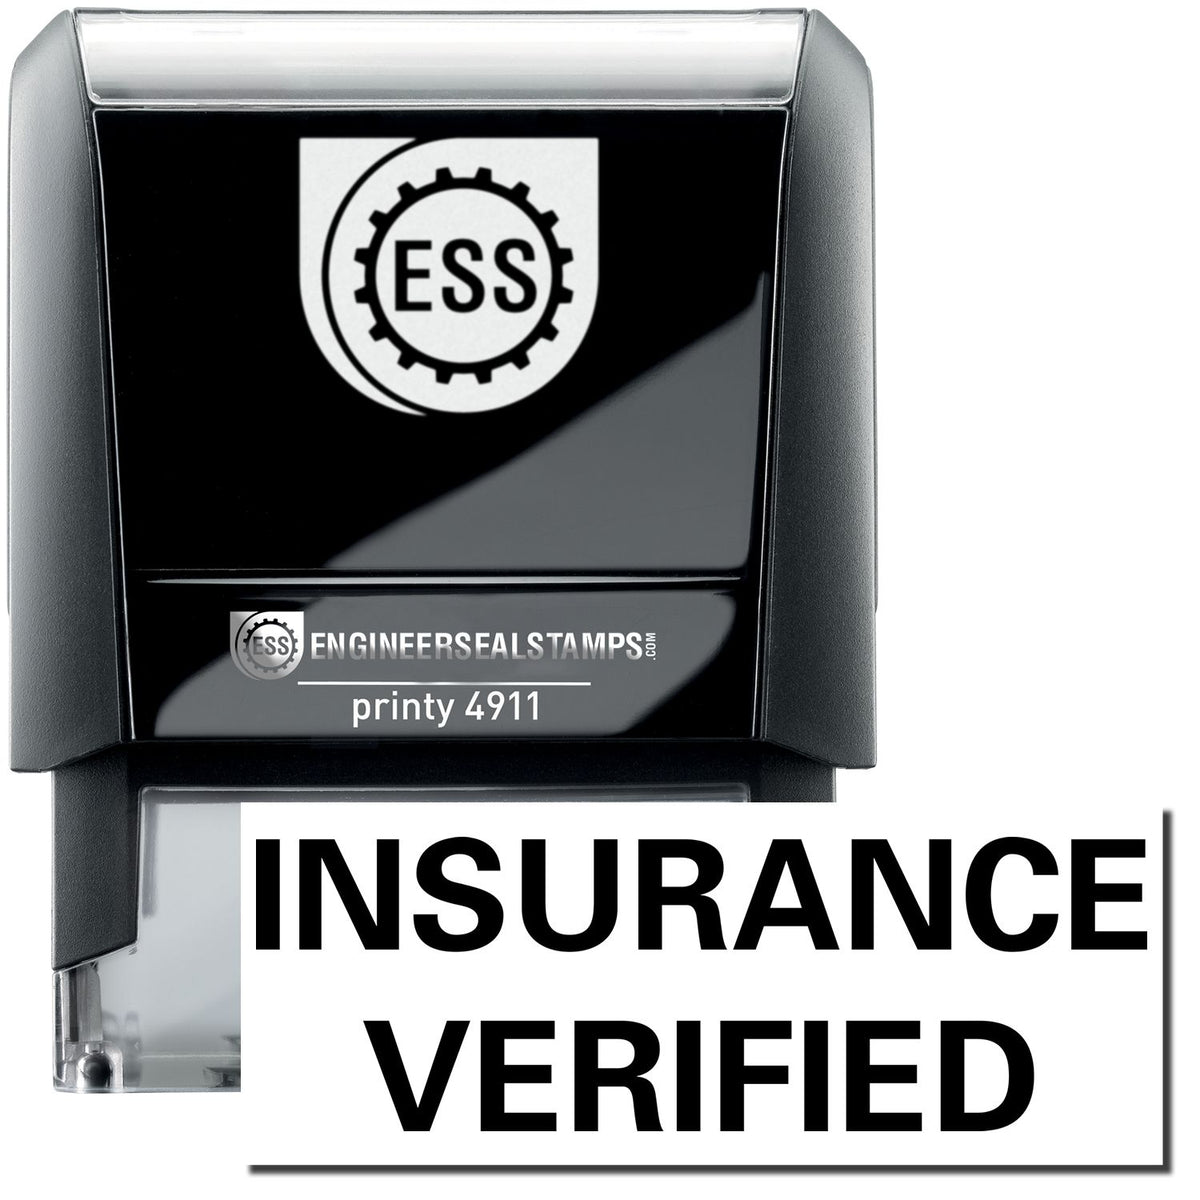 A self-inking stamp with a stamped image showing how the text &quot;INSURANCE VERIFIED&quot; is displayed after stamping.